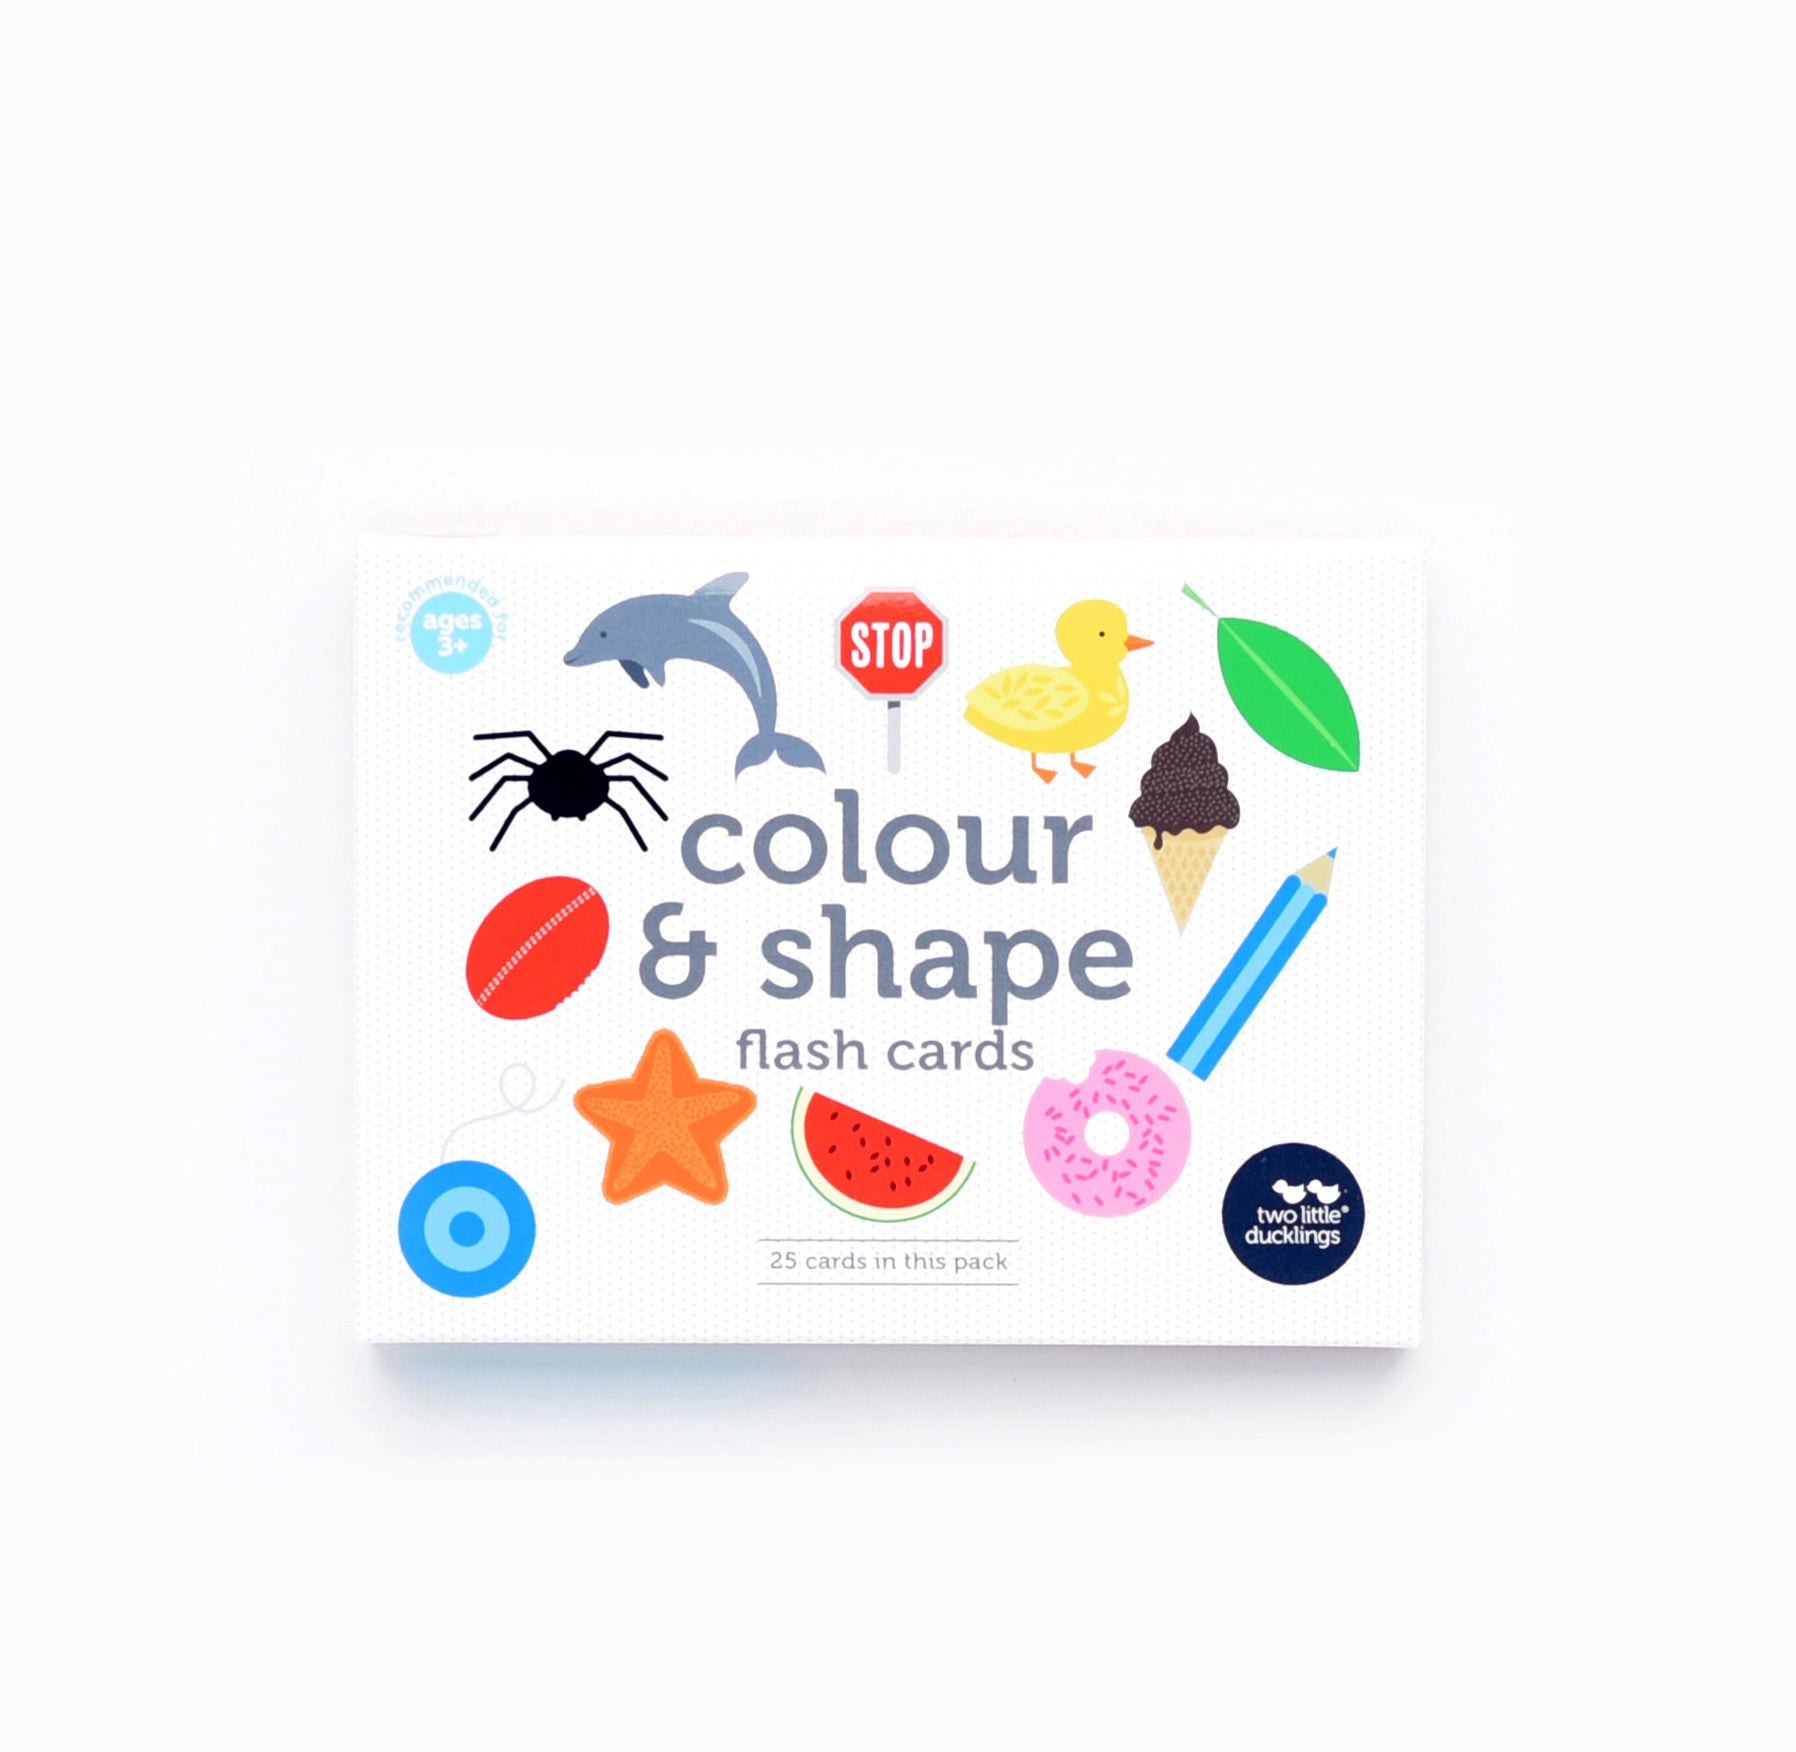  Colour and shape flash cards by Two Little Ducklings  